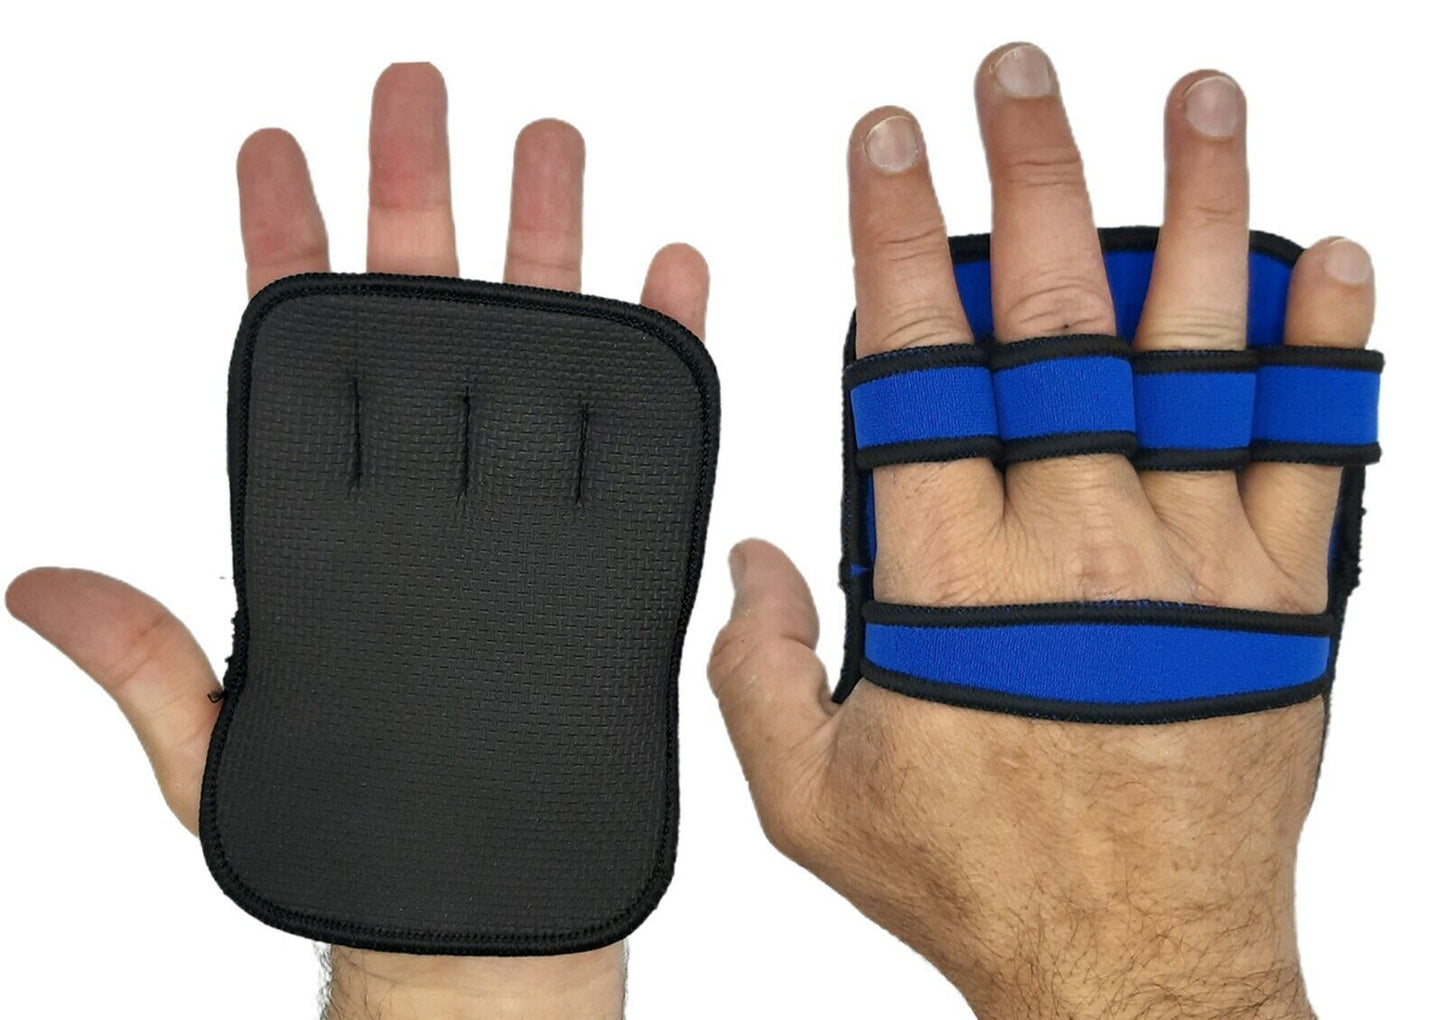 MRX Weightlifting gloves pads gripping Weight Lifting Hand Support